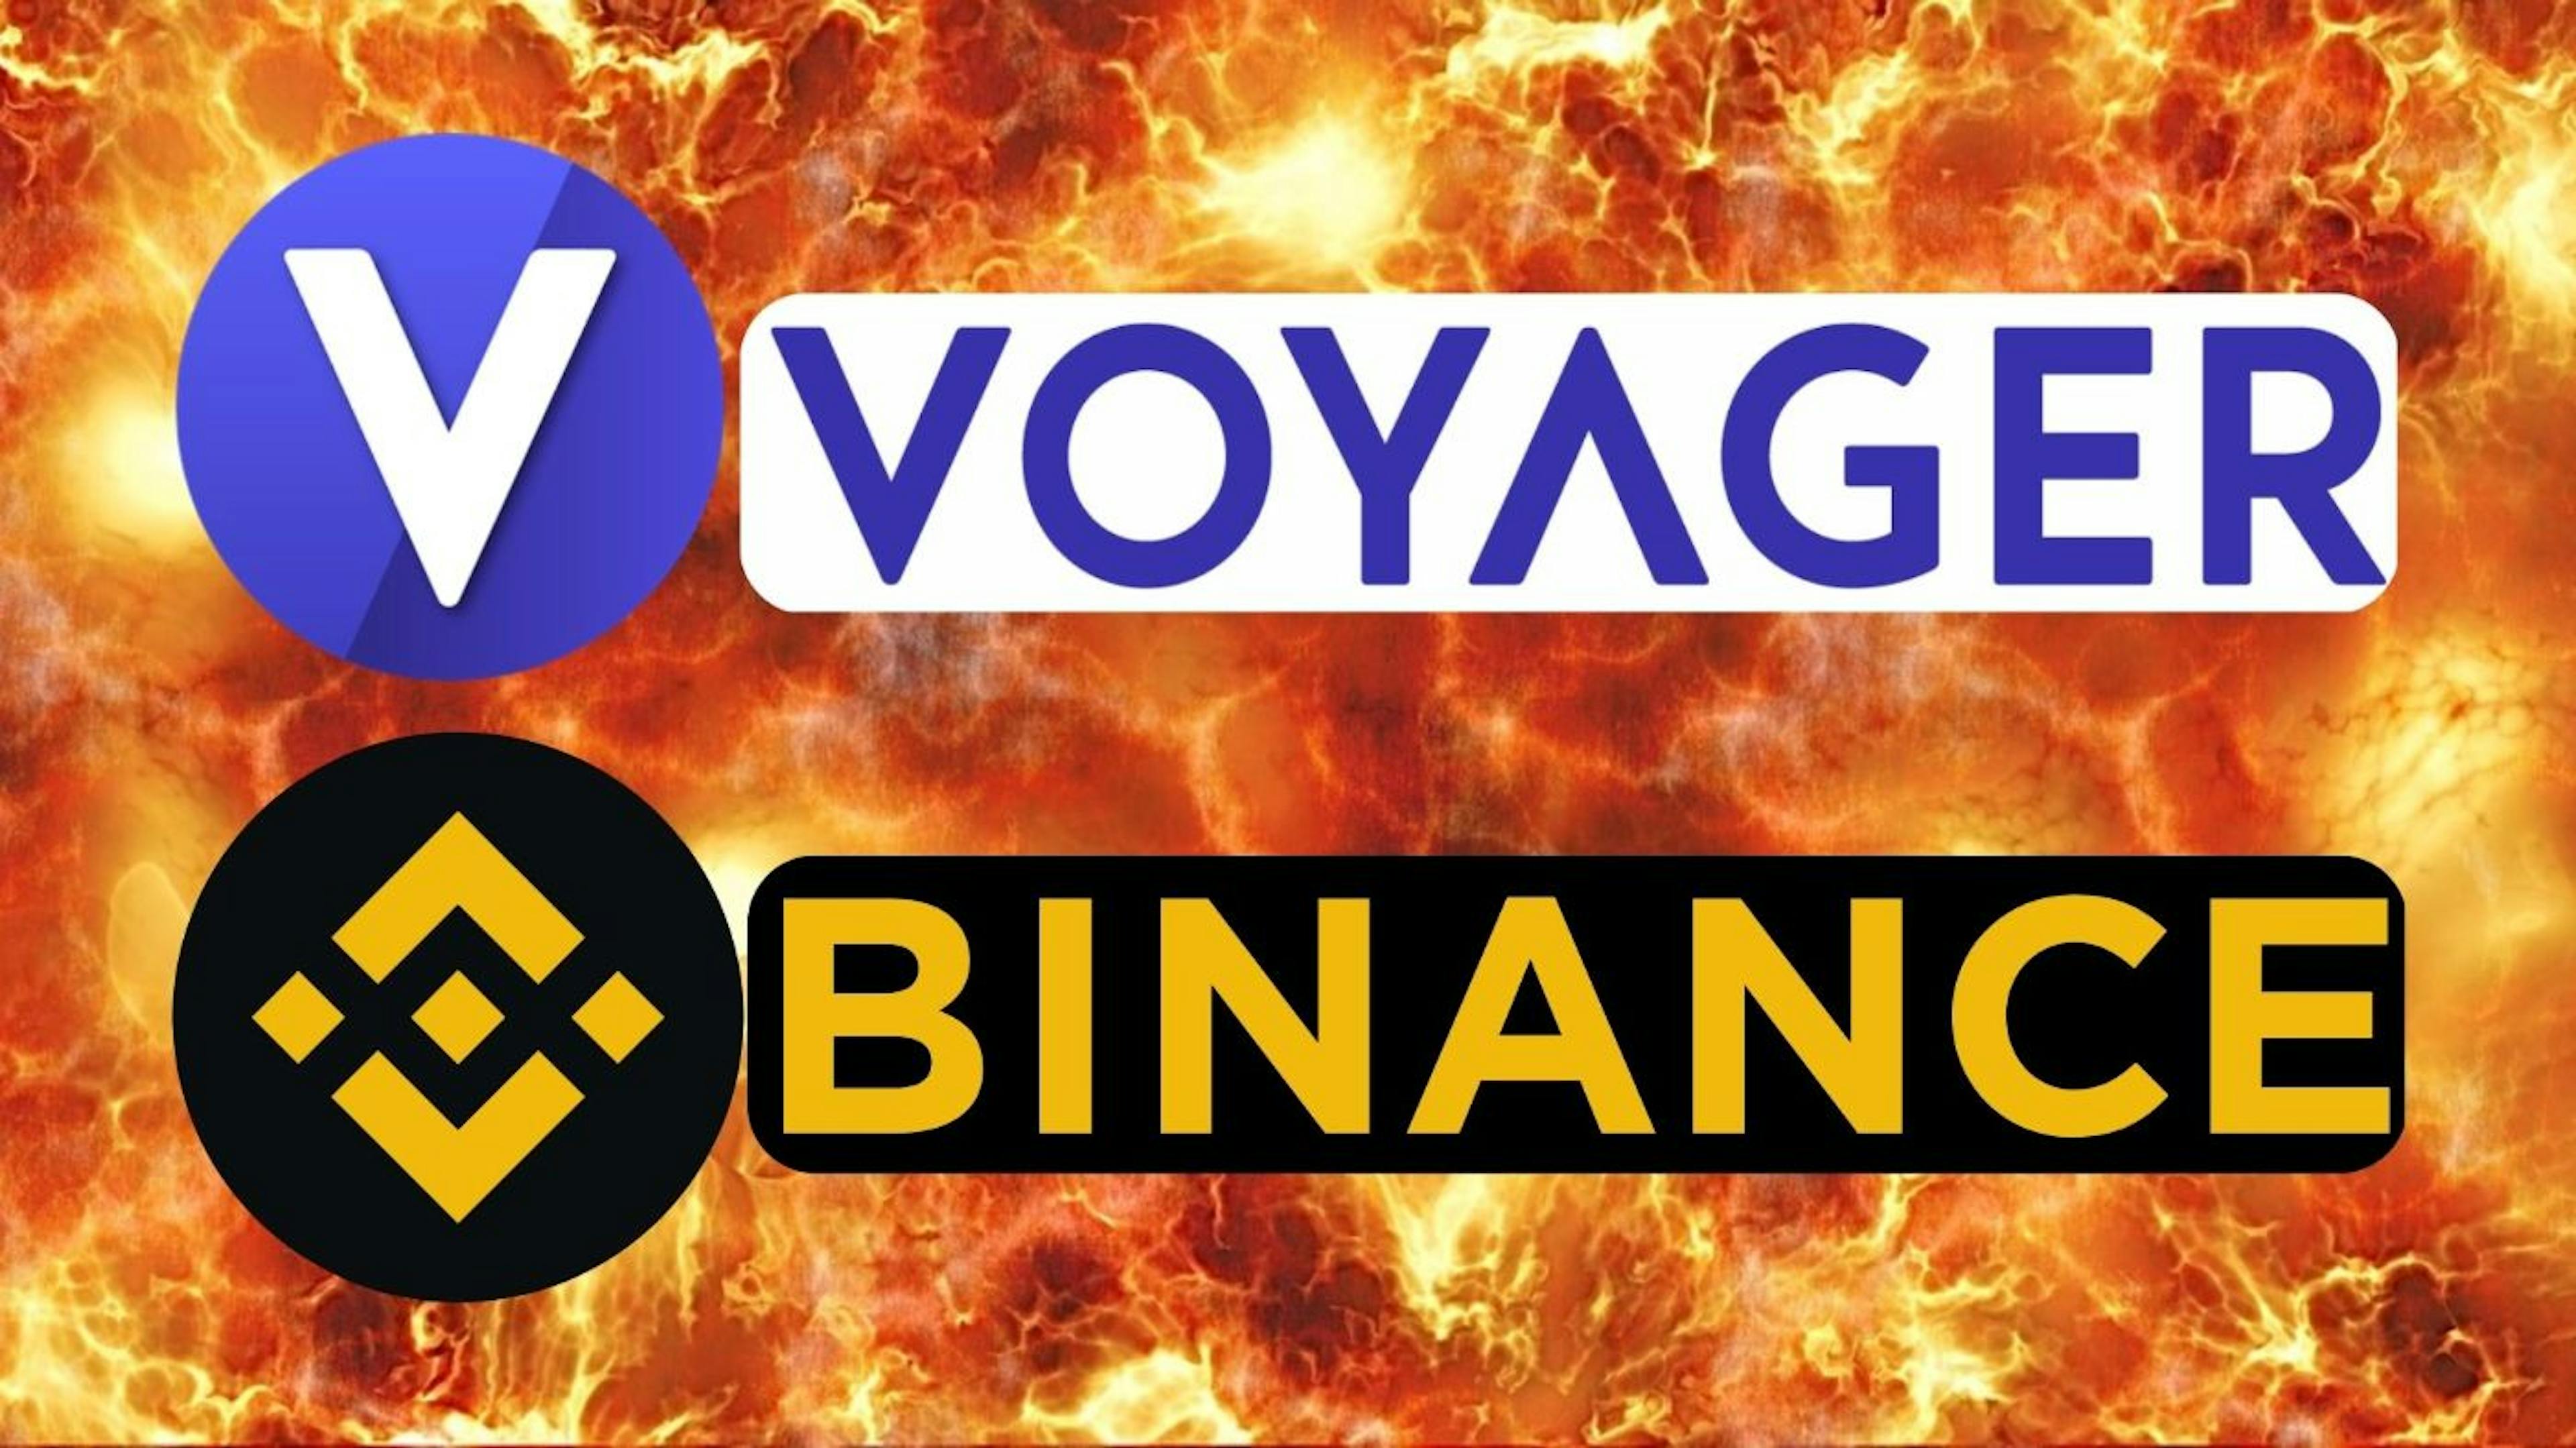 featured image - How Binance Terminated the Voyager Deal via Email